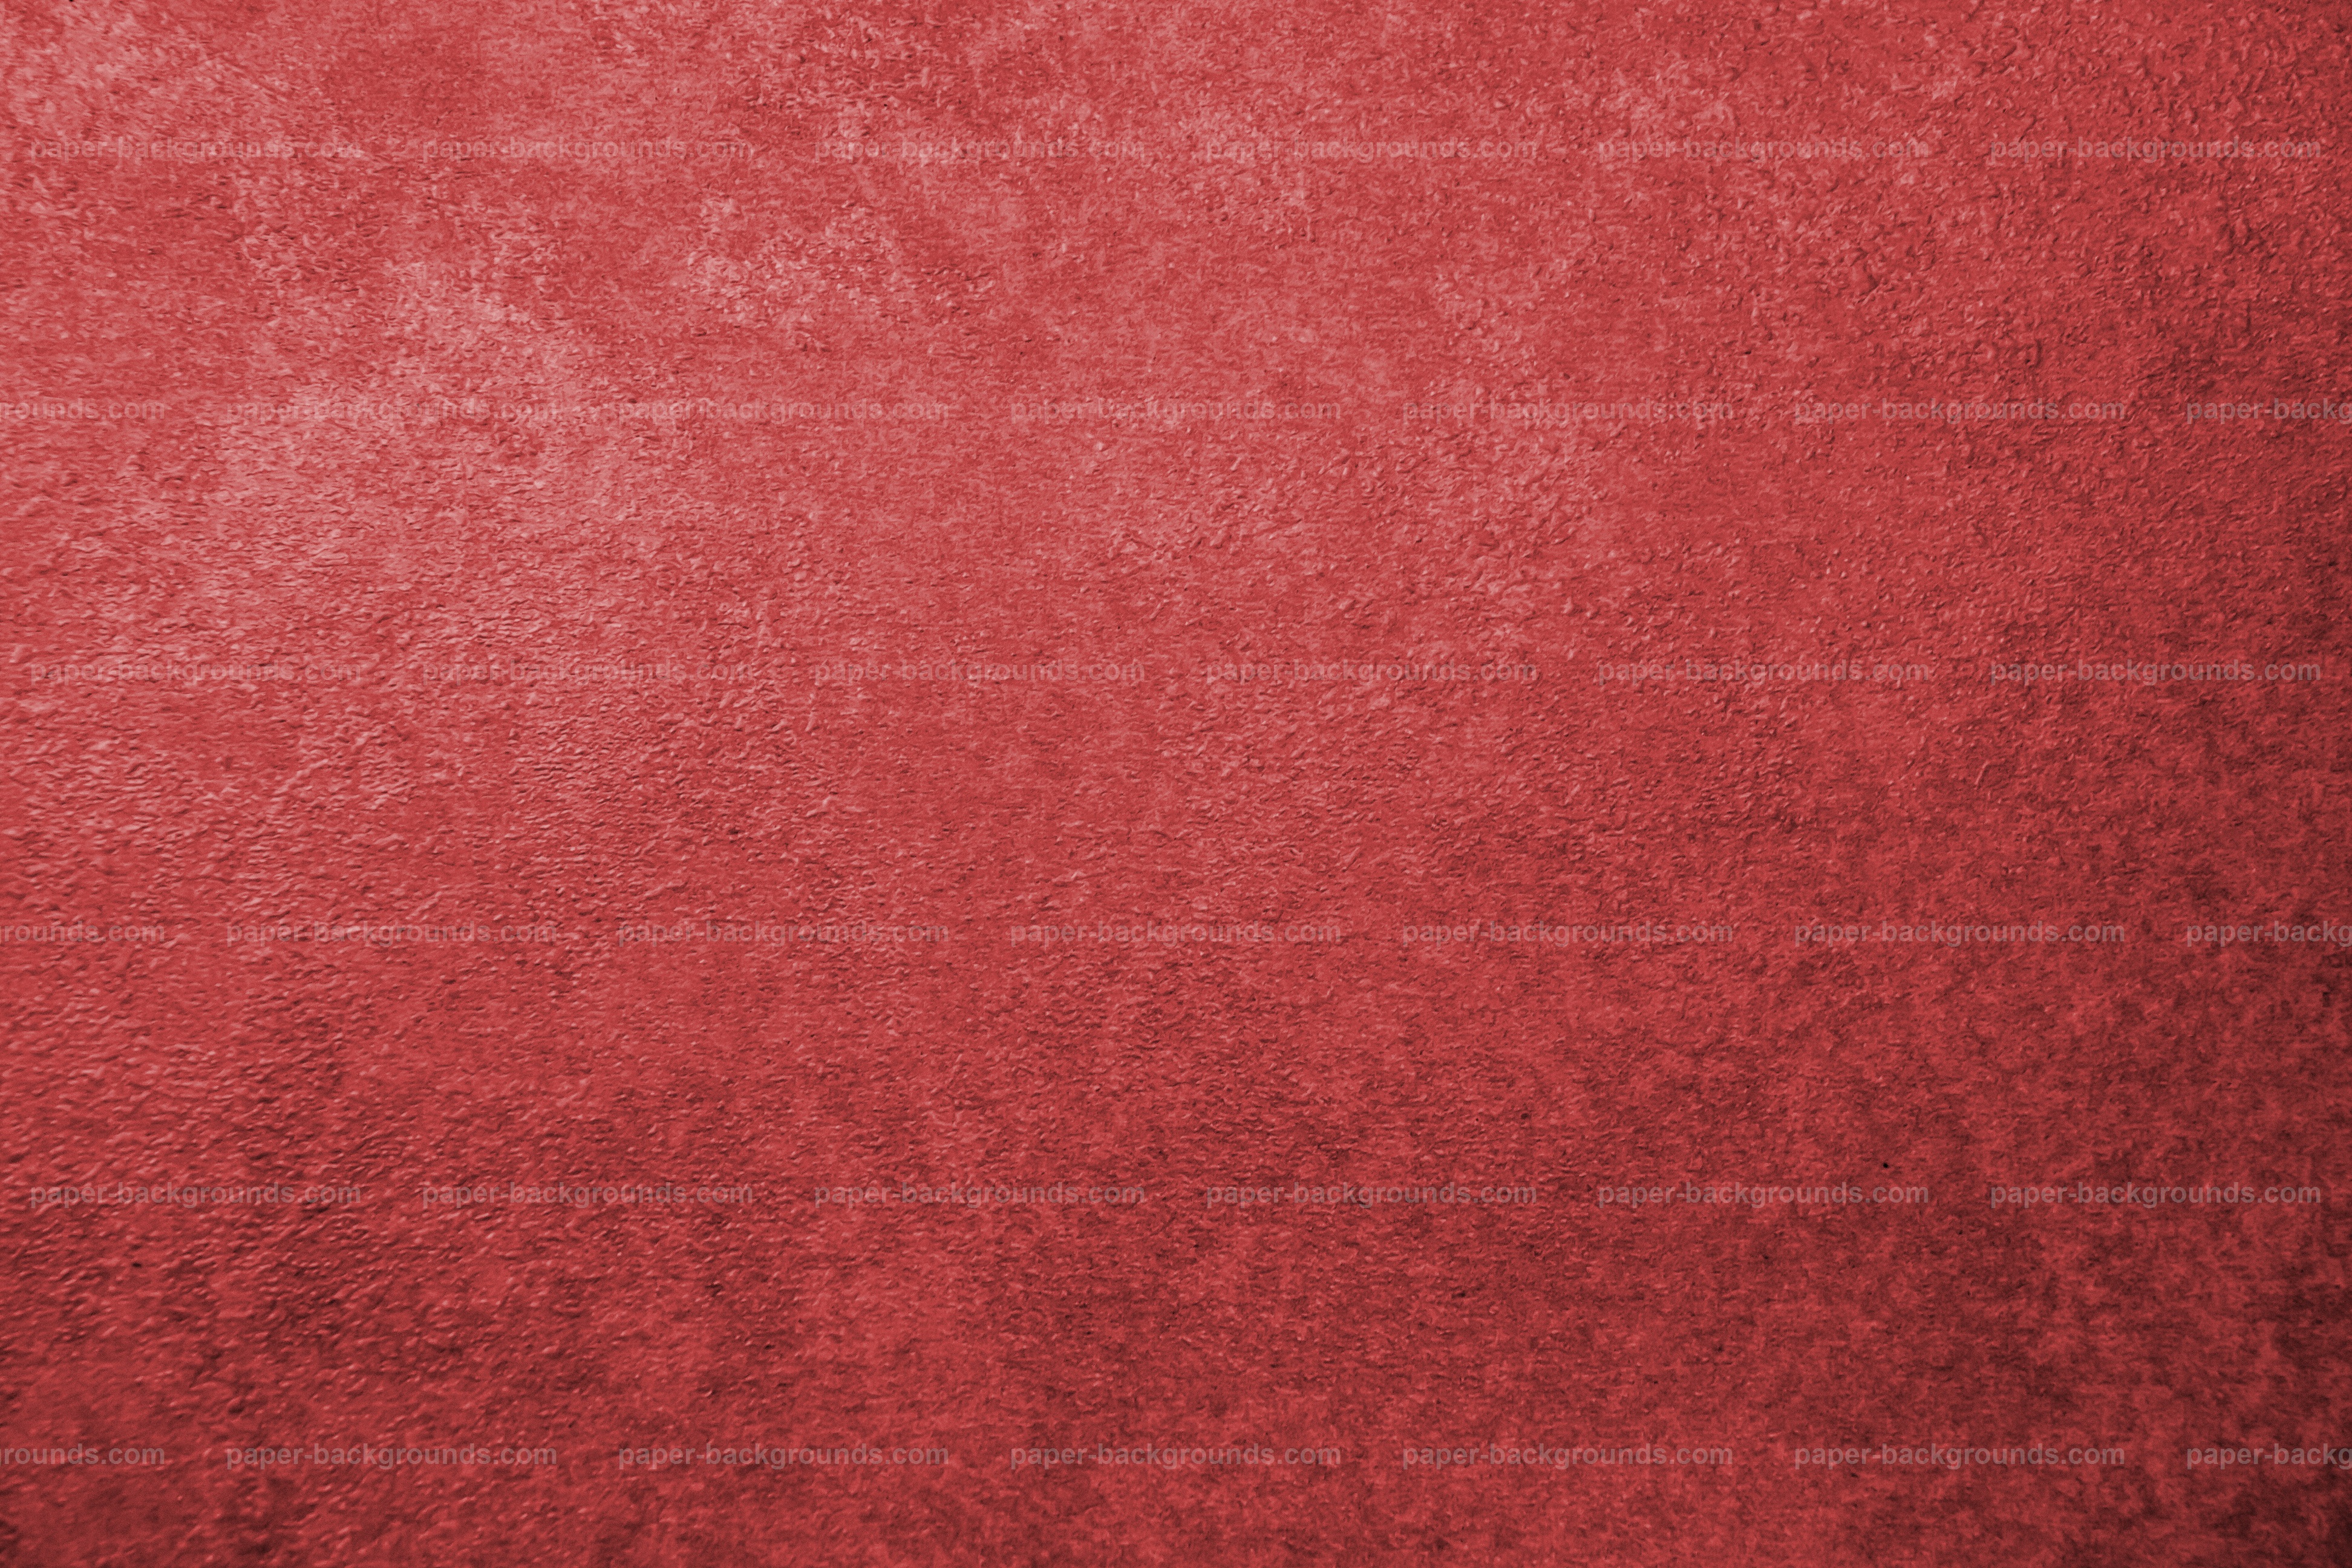 Paper Backgrounds | Red Wall Texture Vintage Background